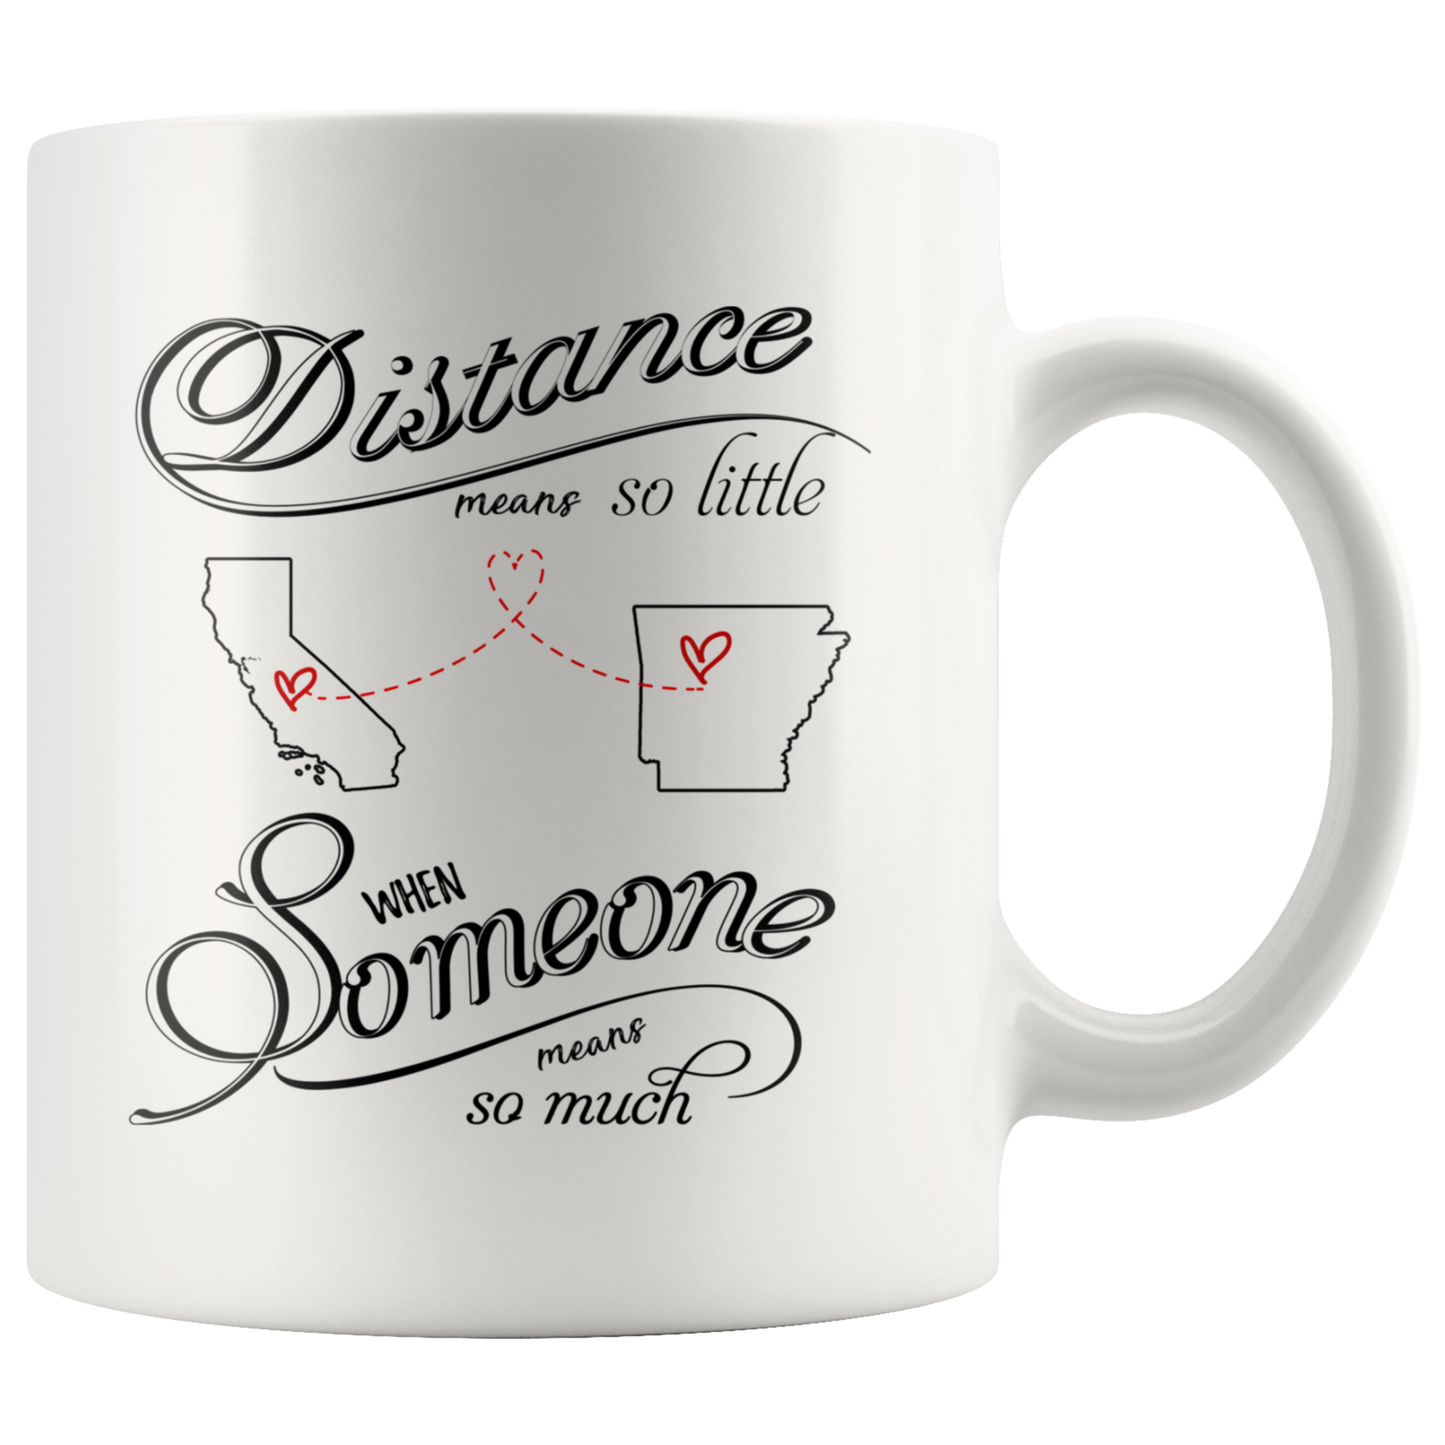 M-20484777-sp-17714 - Mothers Day Coffee Mug California Arkansas Distance Means So